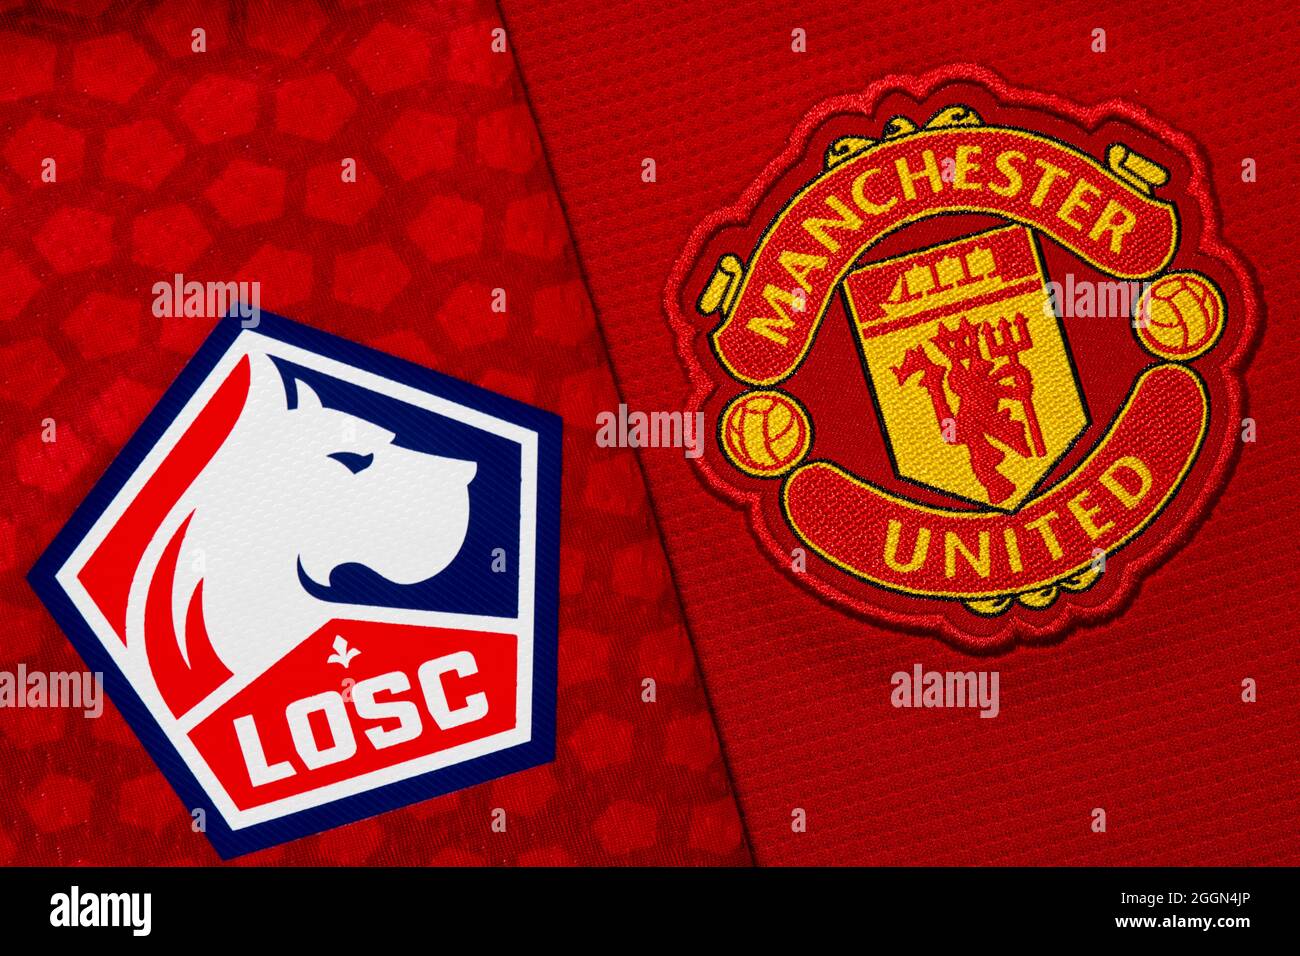 Close up of Manchester United & Lille OSC club crest. Stock Photo